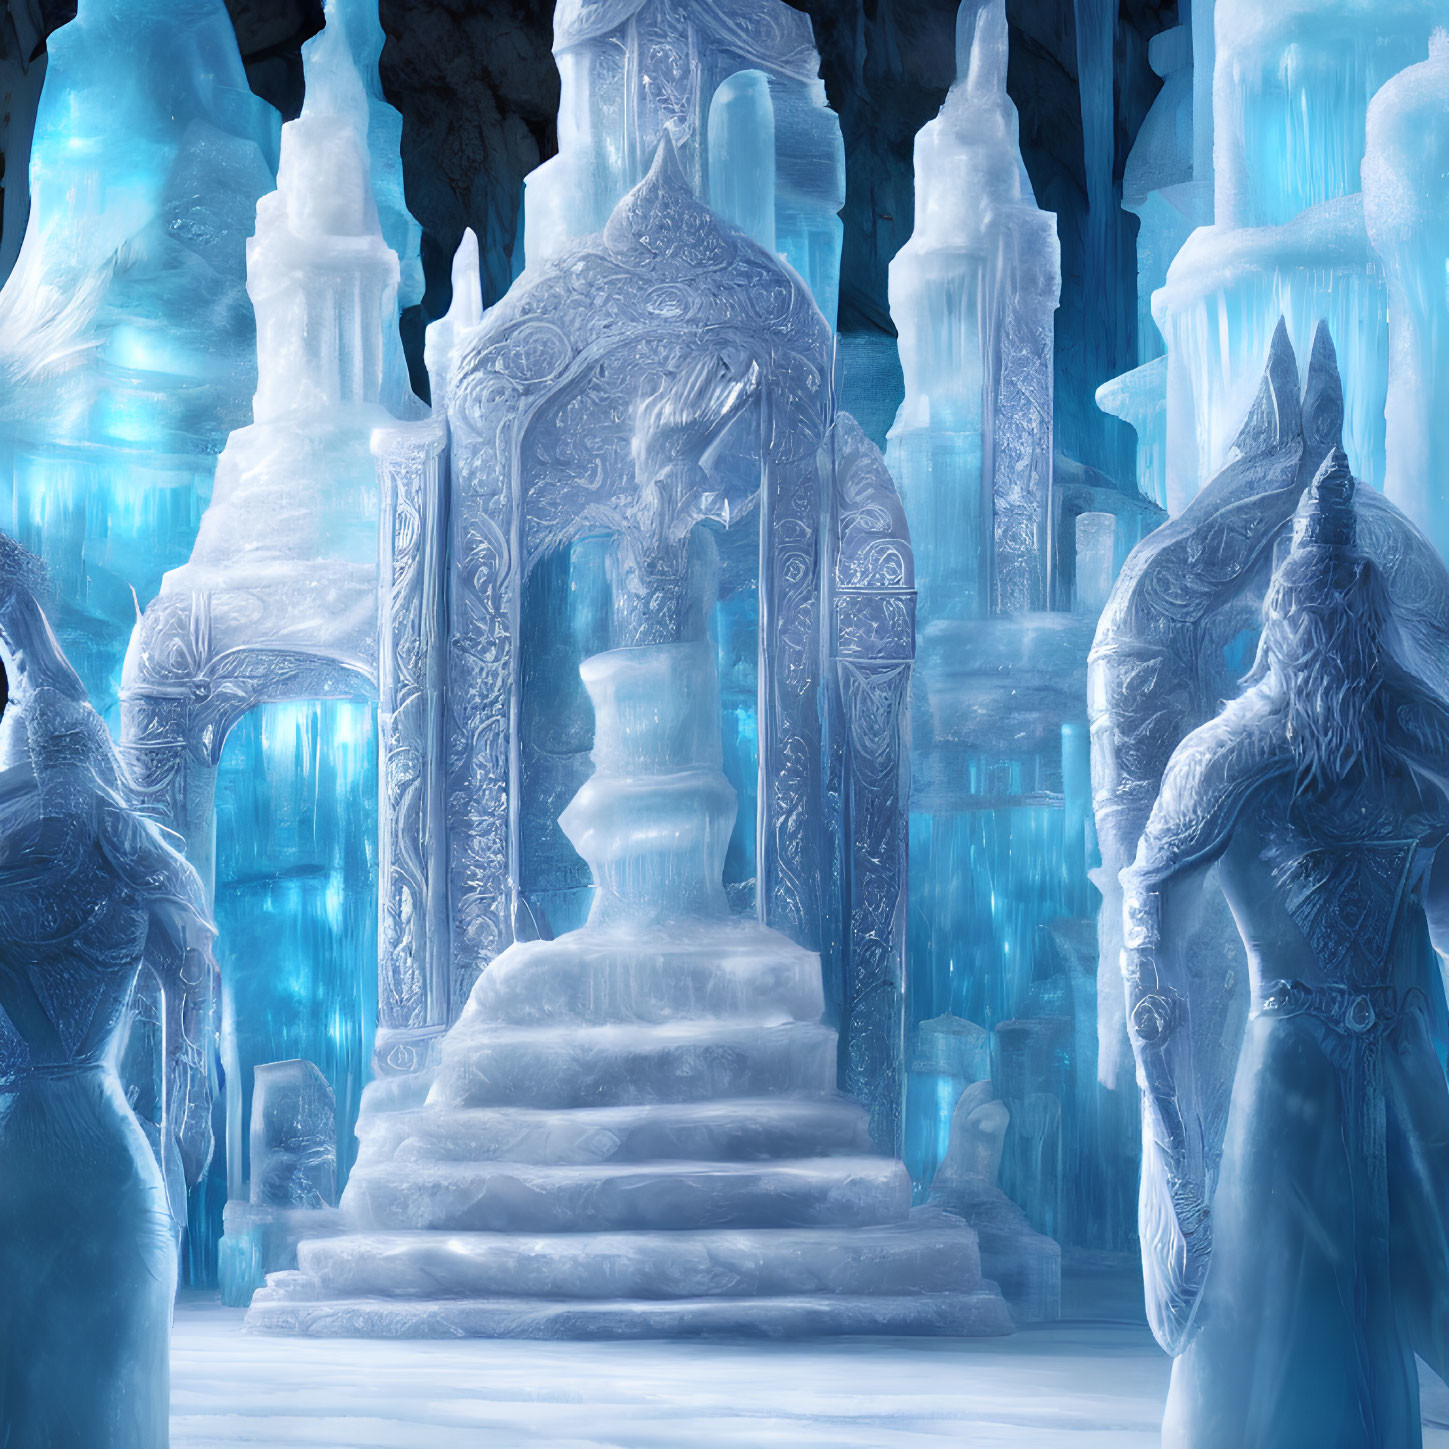 Mystical ice palace interior with frozen pillars and icy throne